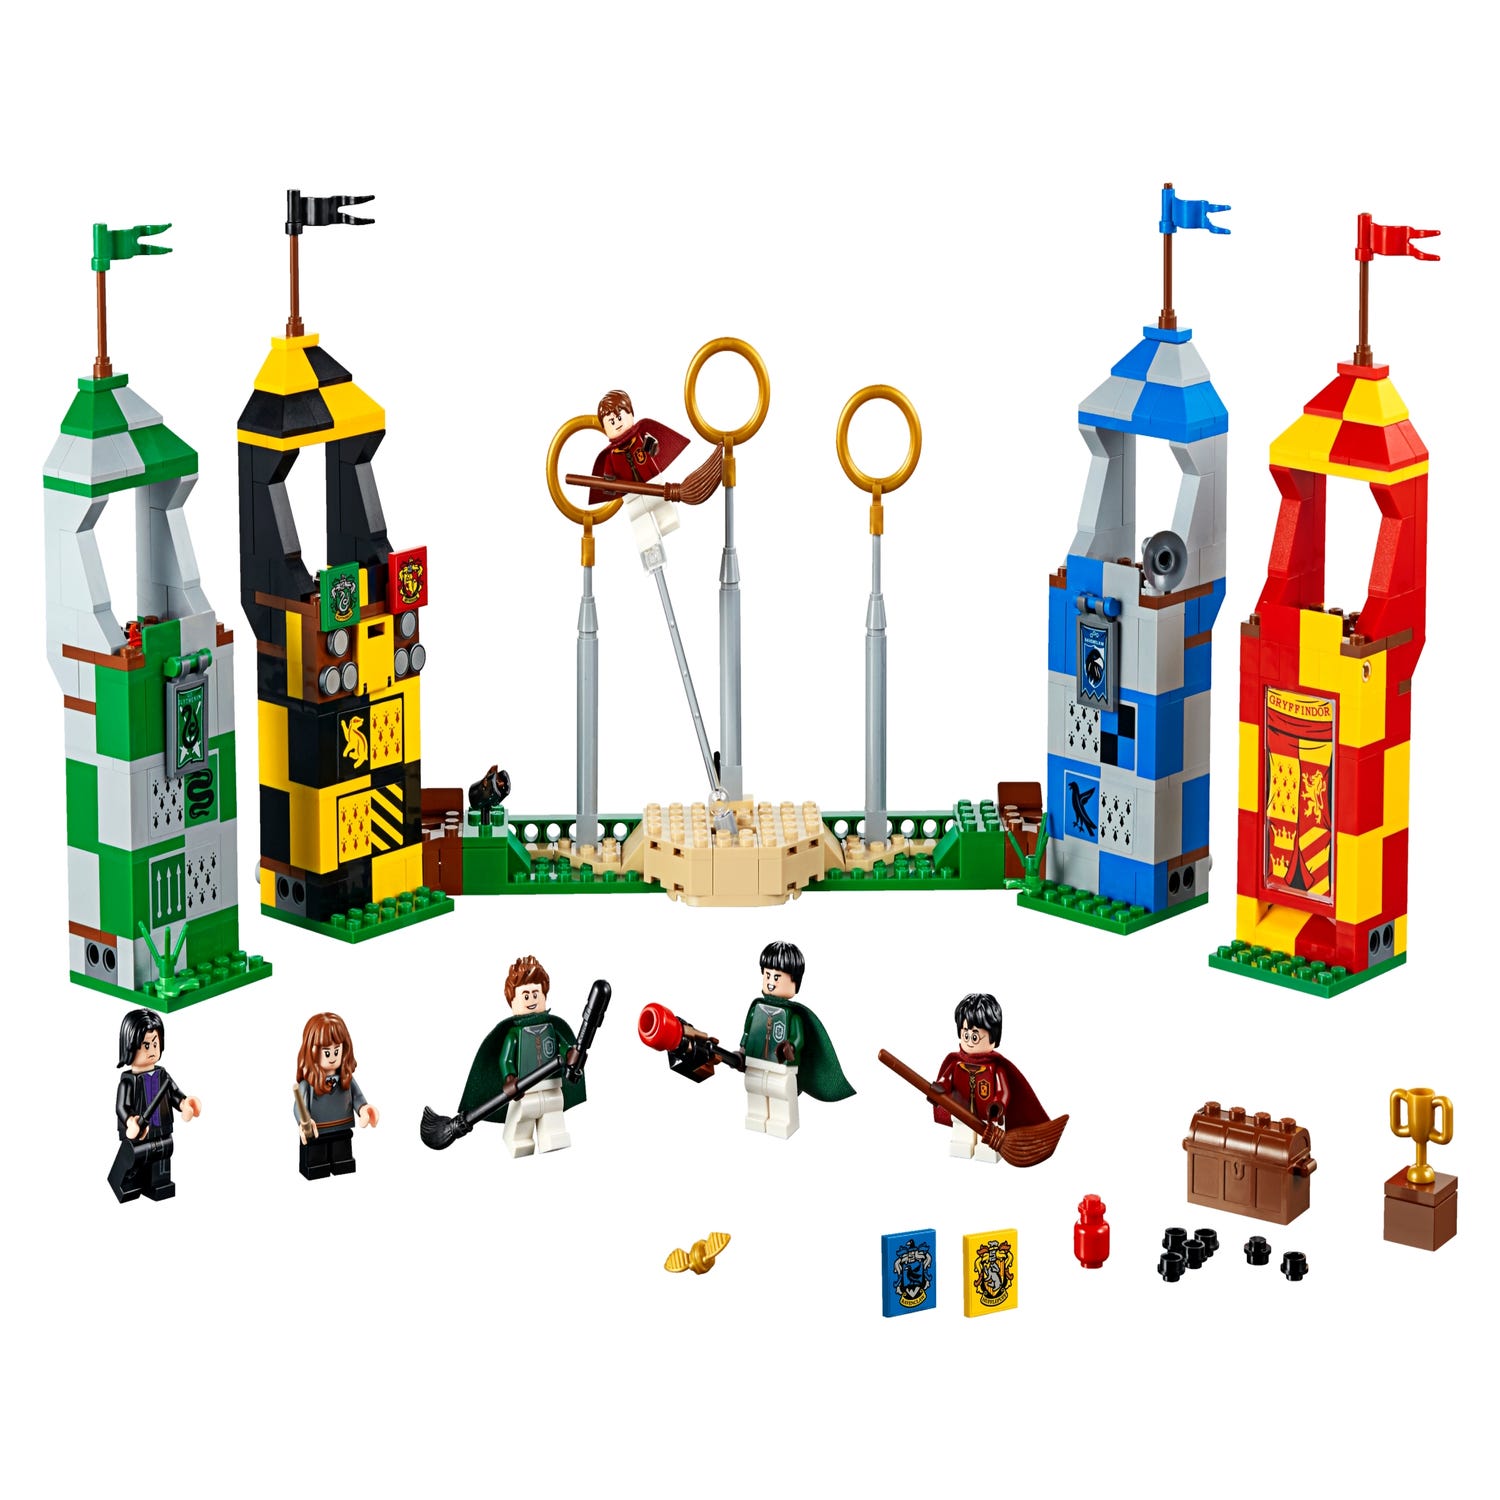 quidditch-match-75956-harry-potter-buy-online-at-the-official-lego-shop-us